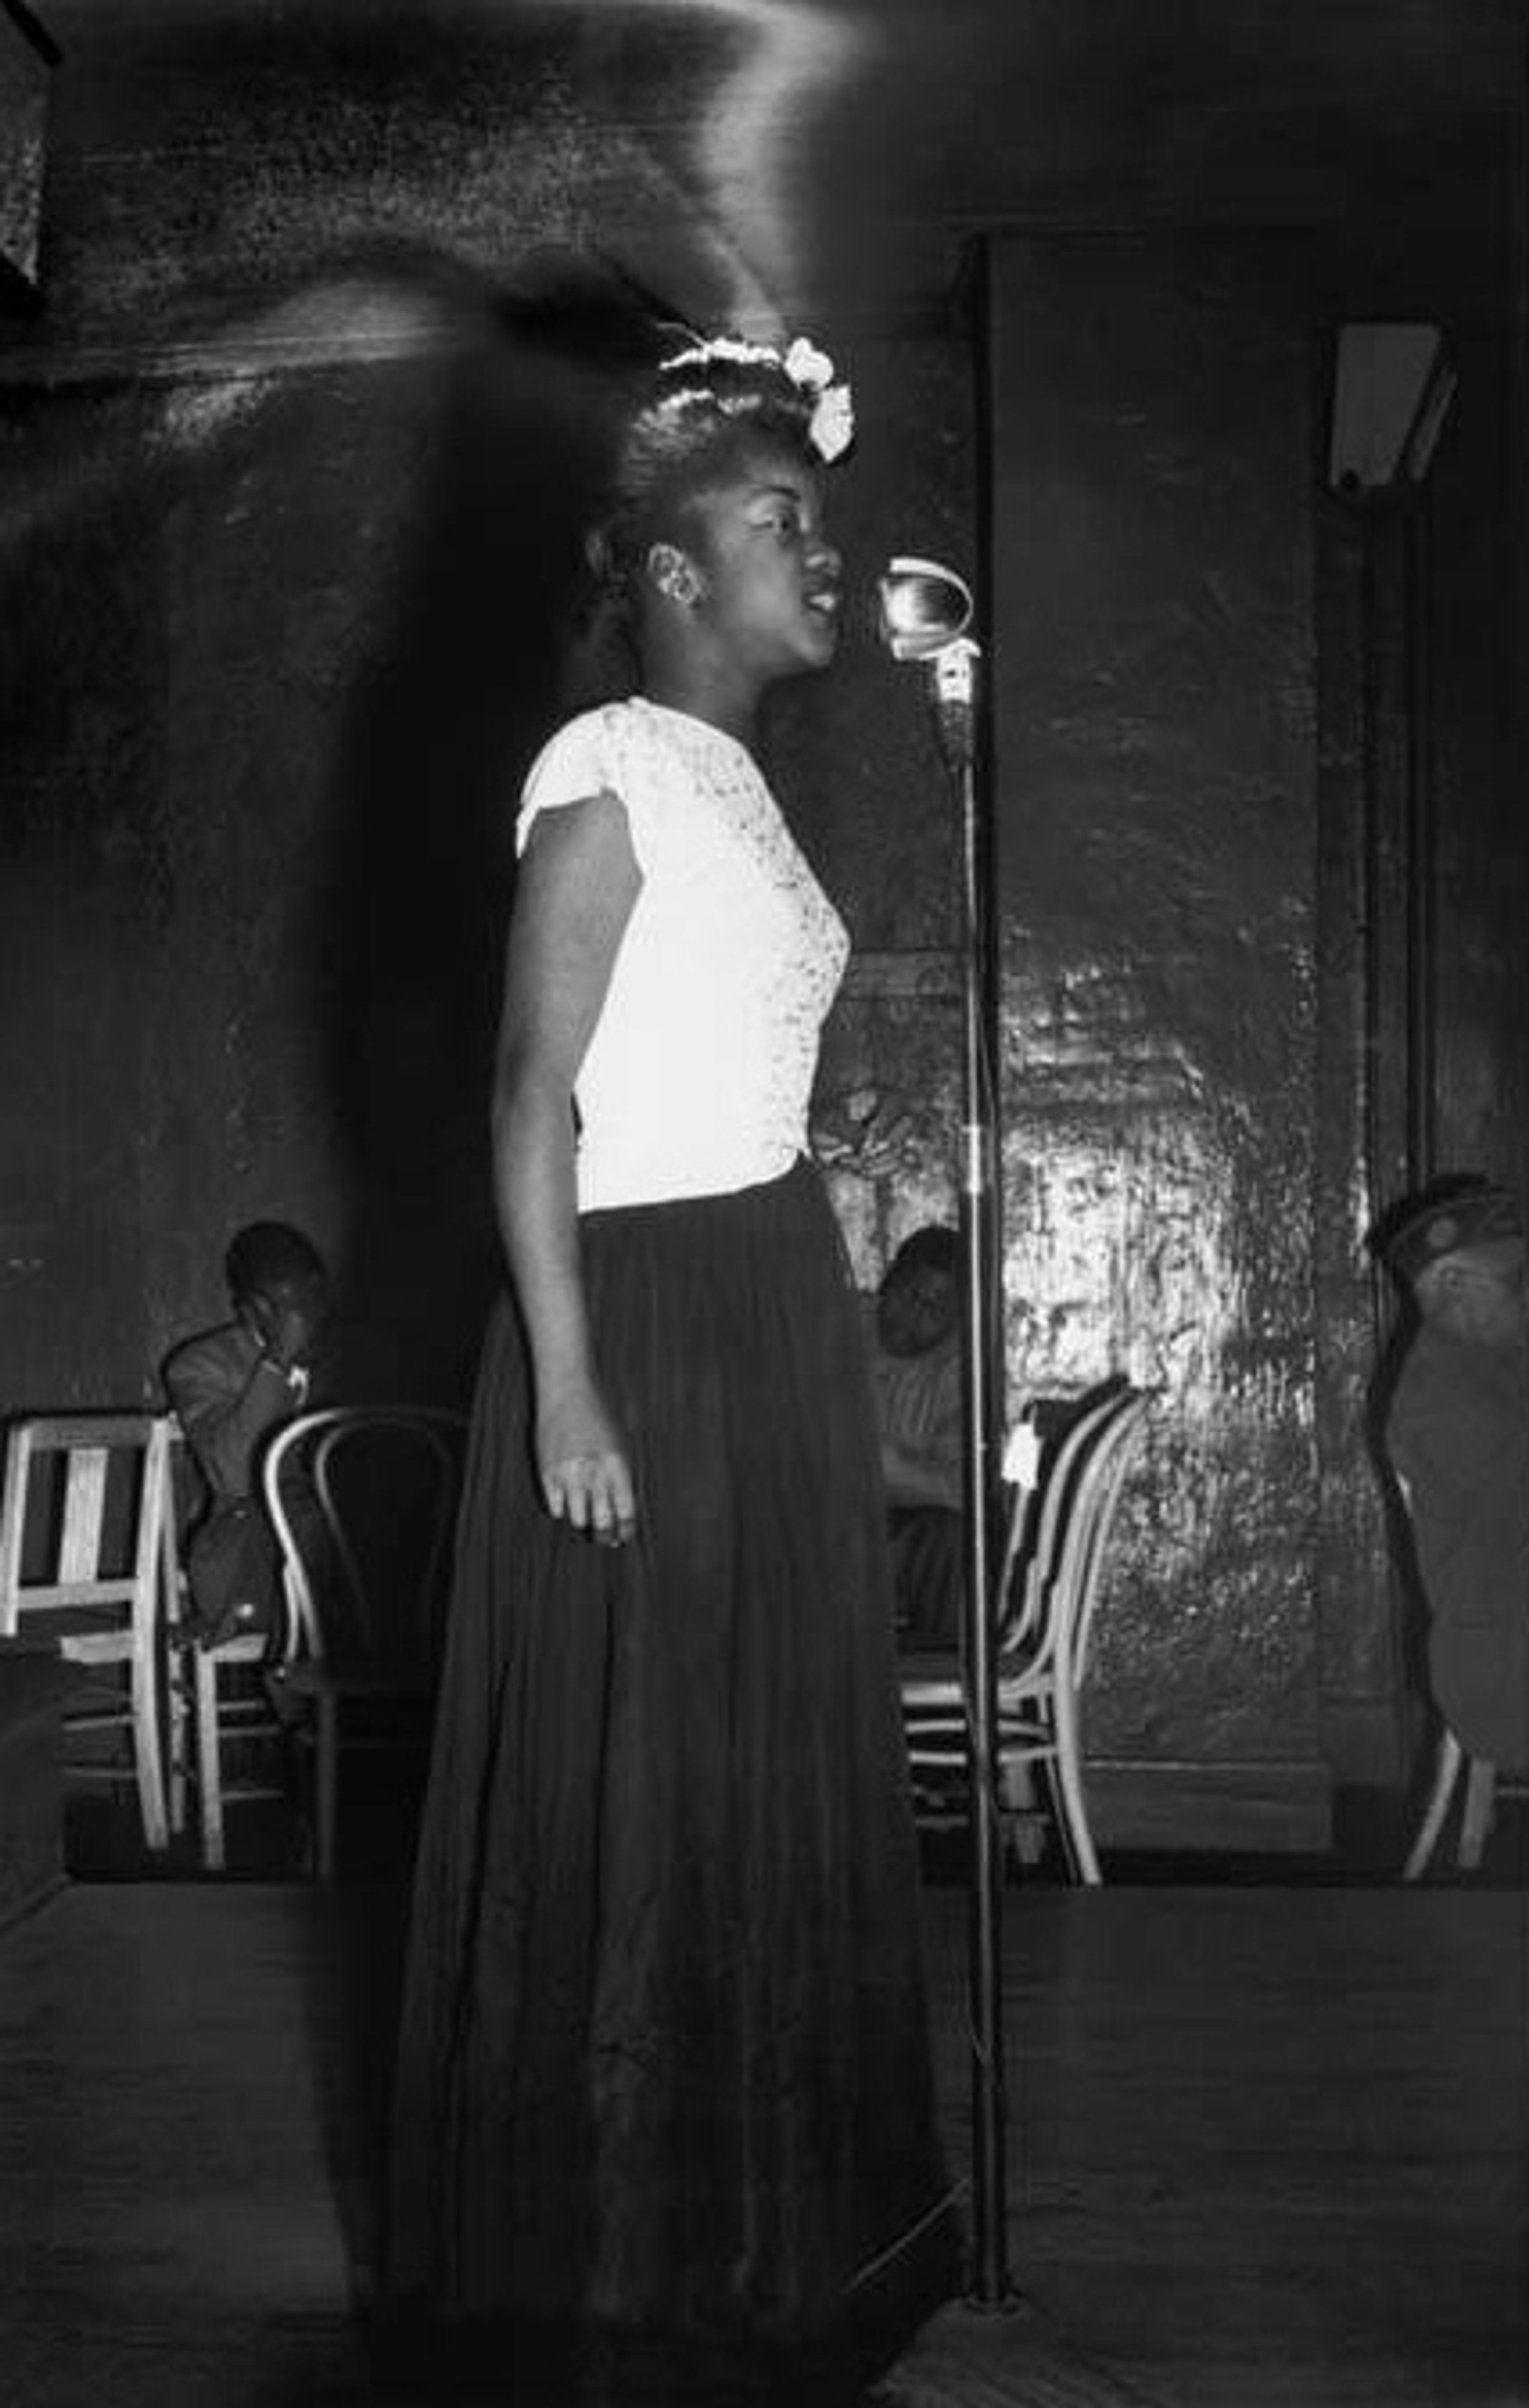 Person in long skirt singing in front of a mic, black and white photo